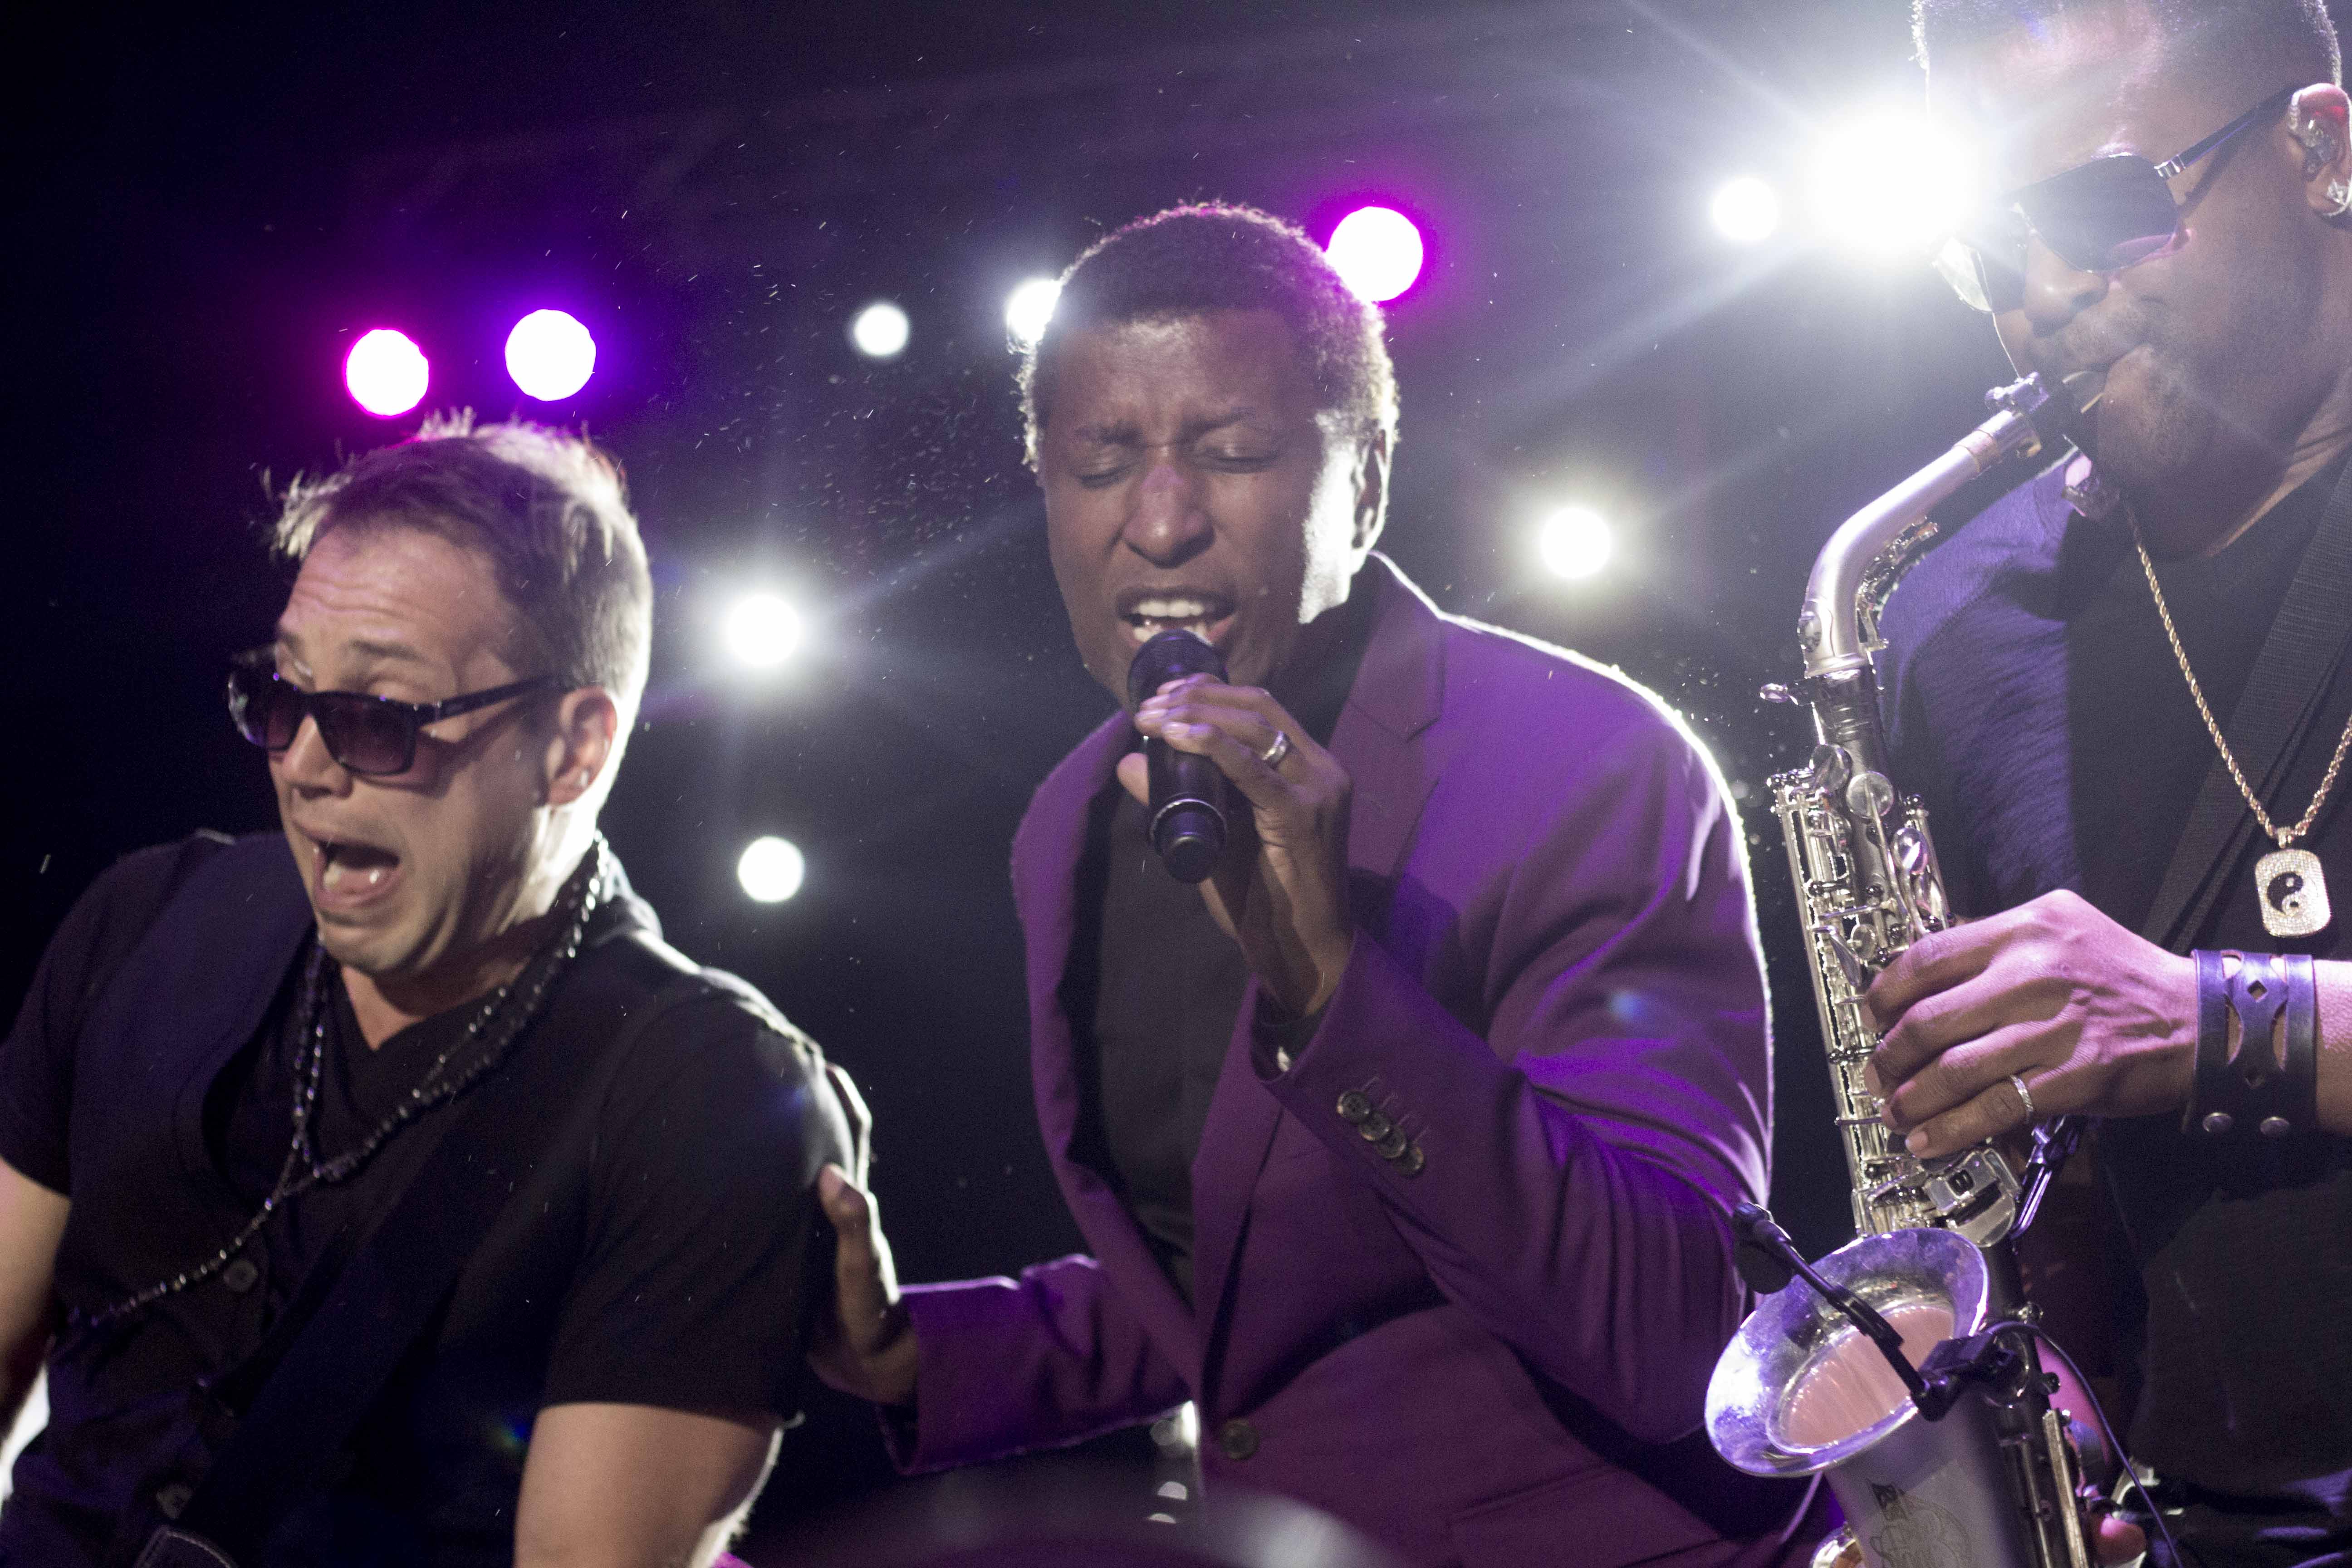 Legendary singer, songwriter and producer Kenneth " Babyface" Edmonds performed a bevy of hits from his extensive catalog of work at Funkfest Birmingham. Reginald Allen, for the Birmingham Times.